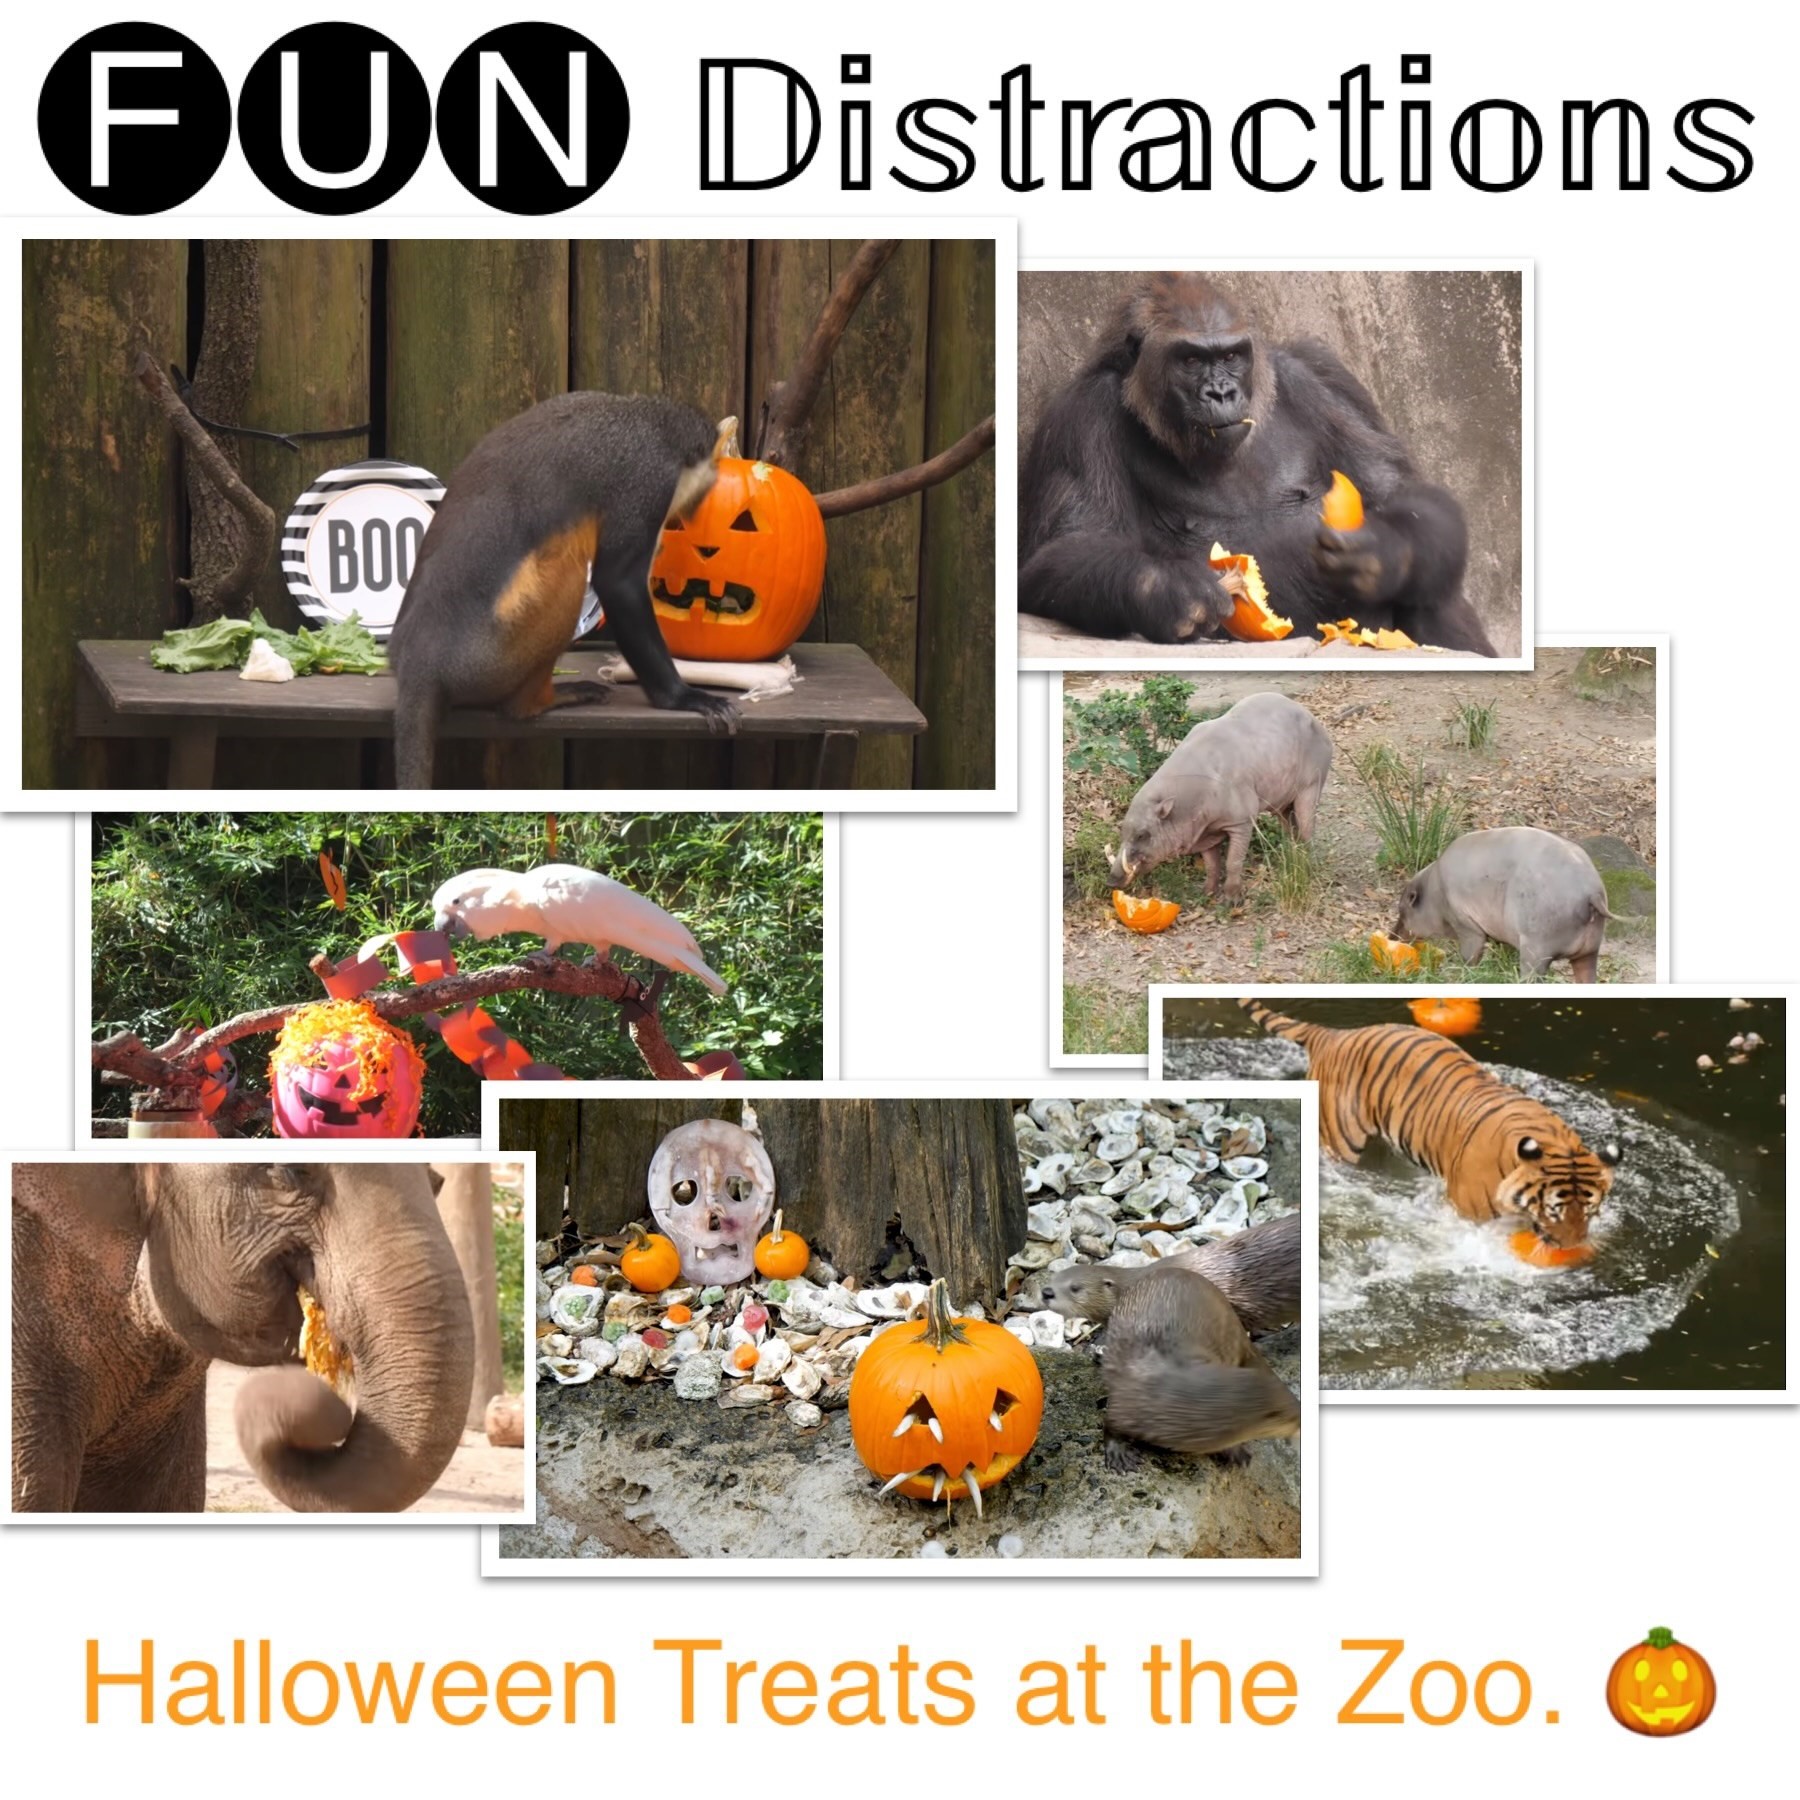 Image advertising the Library’s FUN Distractions series post about zoo animals enjoying Halloween treats